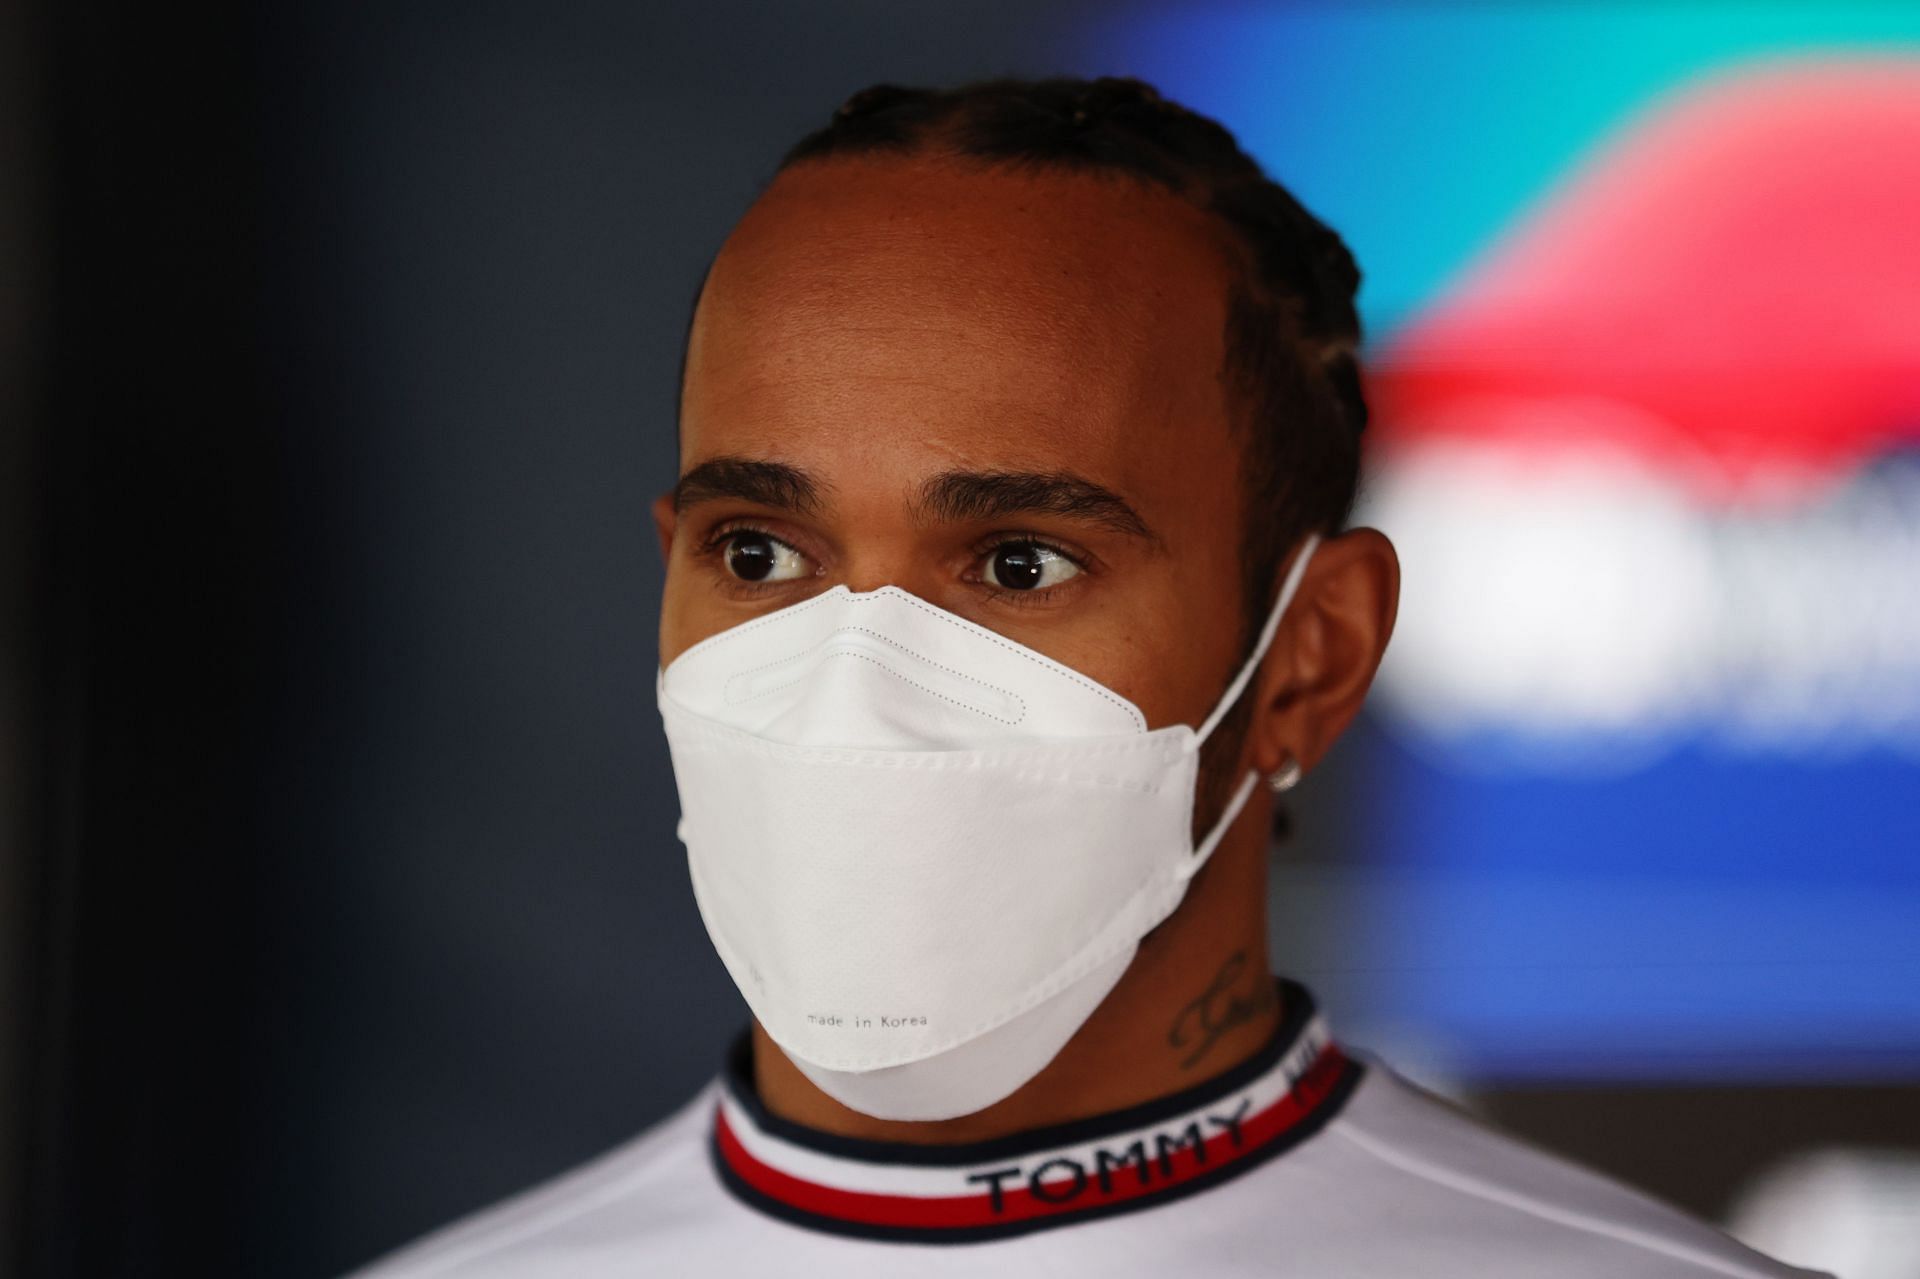 Lewis Hamilton called on F1 to act on its commitment to improving diversity and inclusion within the sport